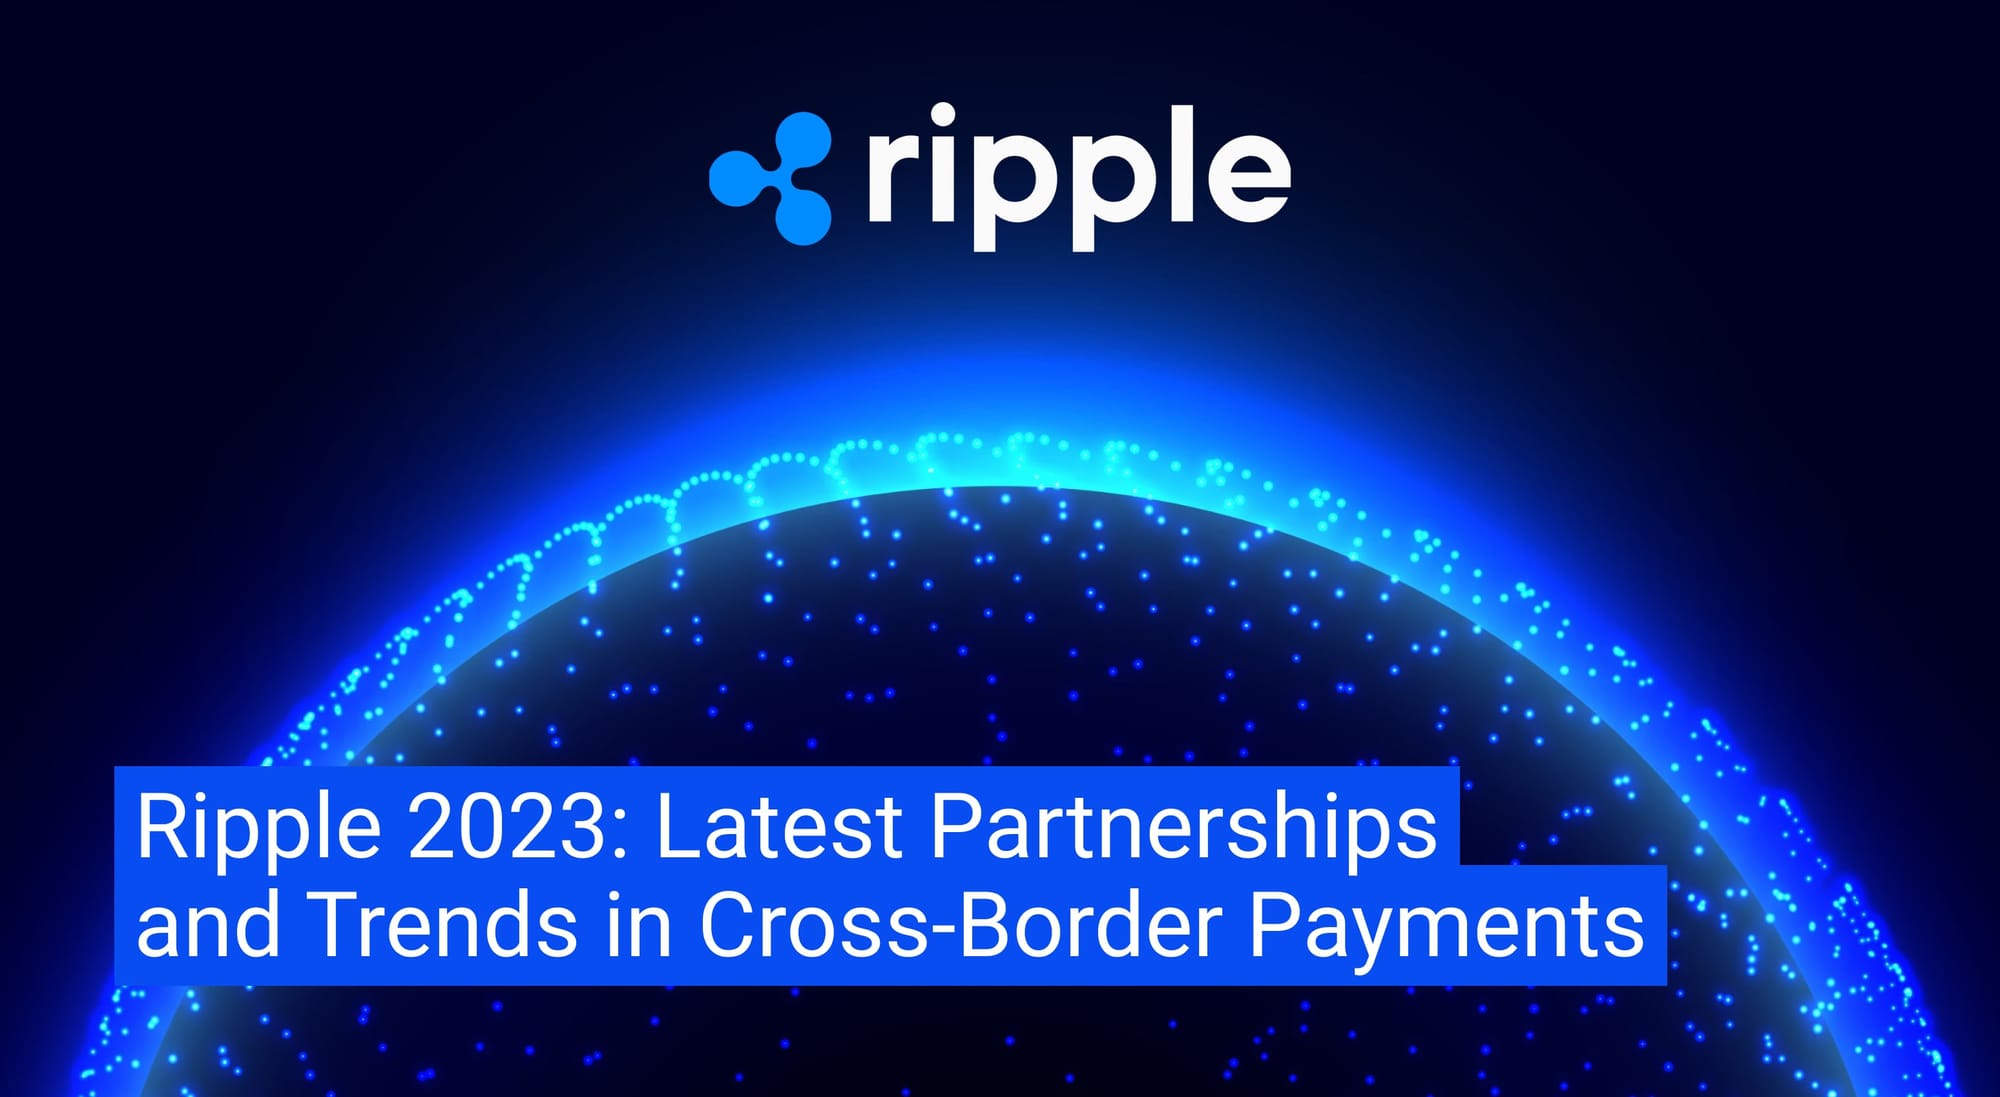 Ripple 2023: Latest Partnerships and Trends in Cross-Border Payments